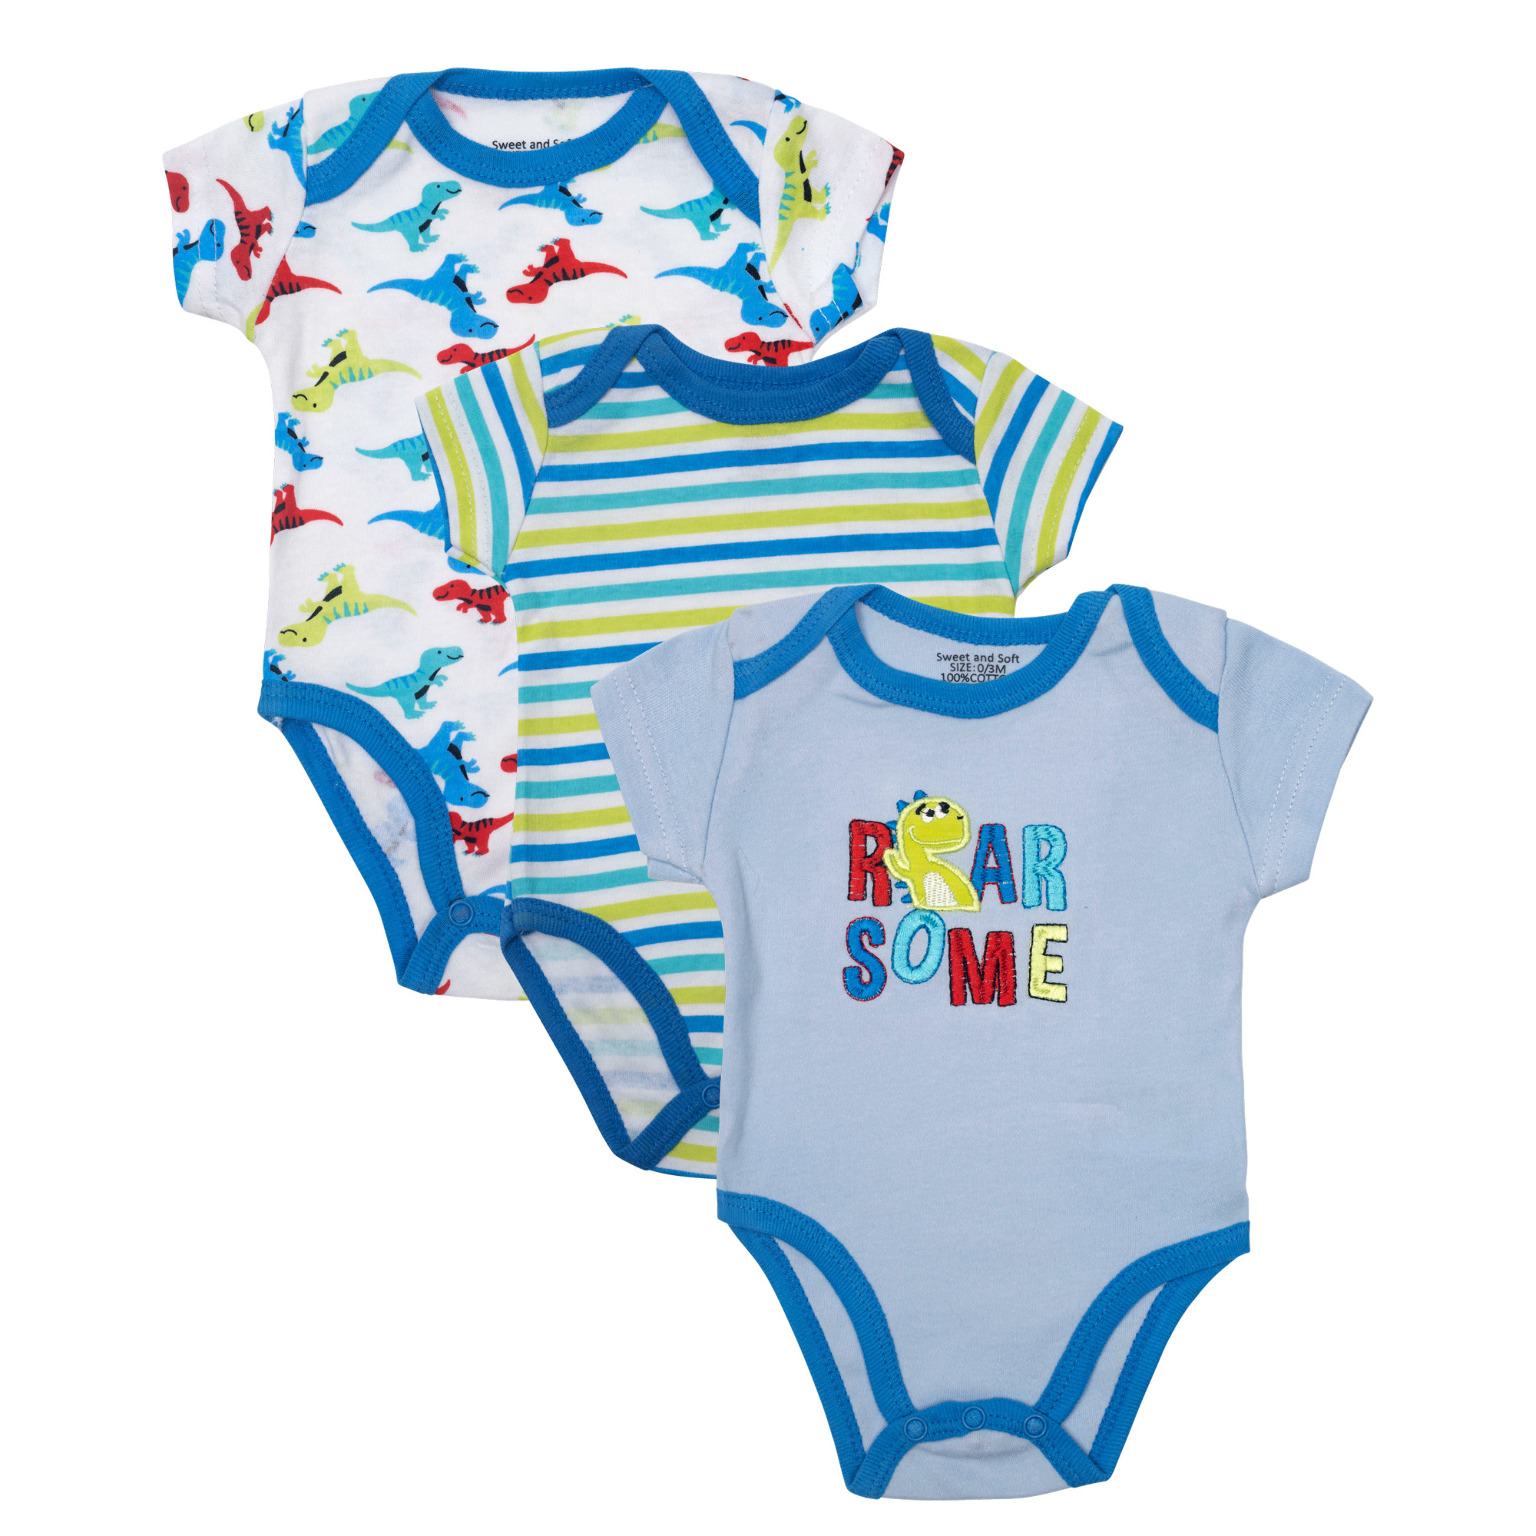 Snap Tape Cream Baby and Toddler Clothing and Bib Closure Snaps by